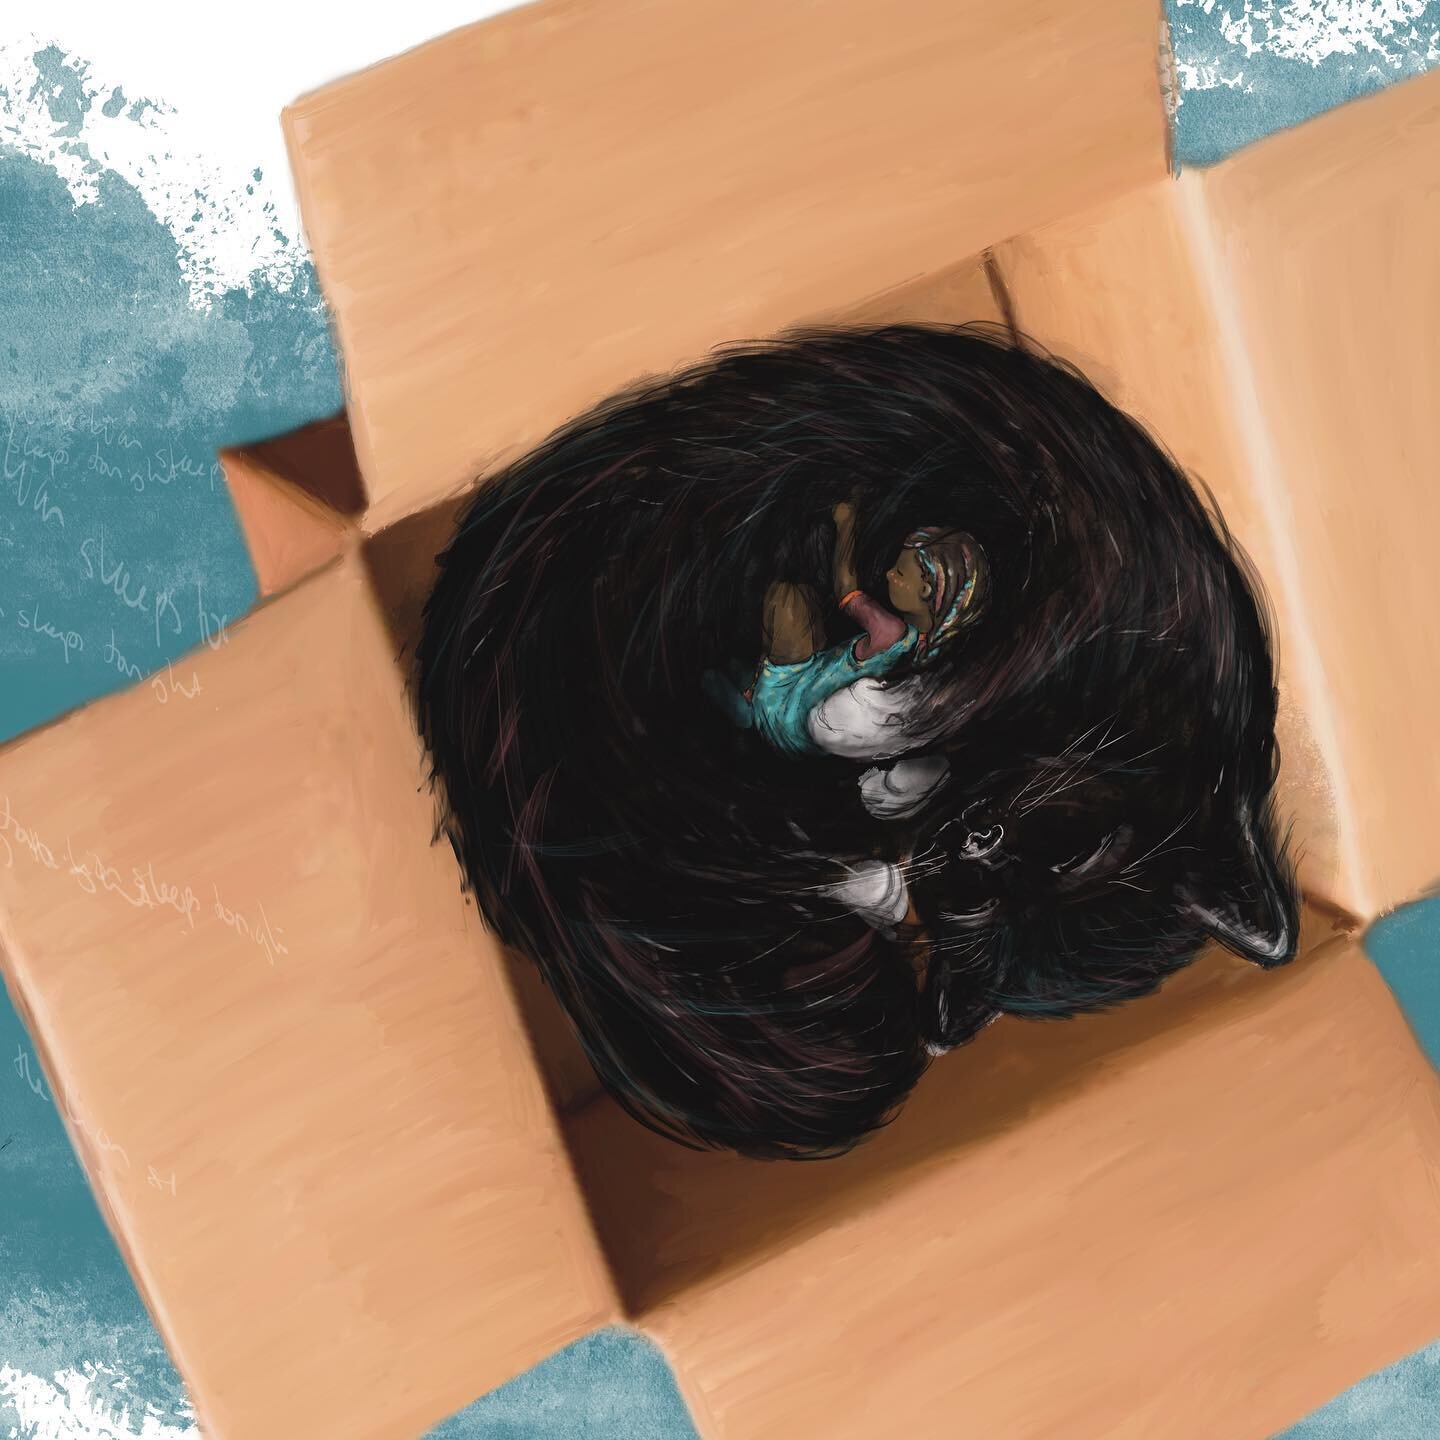 Happy winter solstice Southern Hemisphere! I hope your curled up with something you love near by.

(This is a sneak peak detail from a children&rsquo;s book I&rsquo;ve made. 💕 🐈&zwj;⬛)